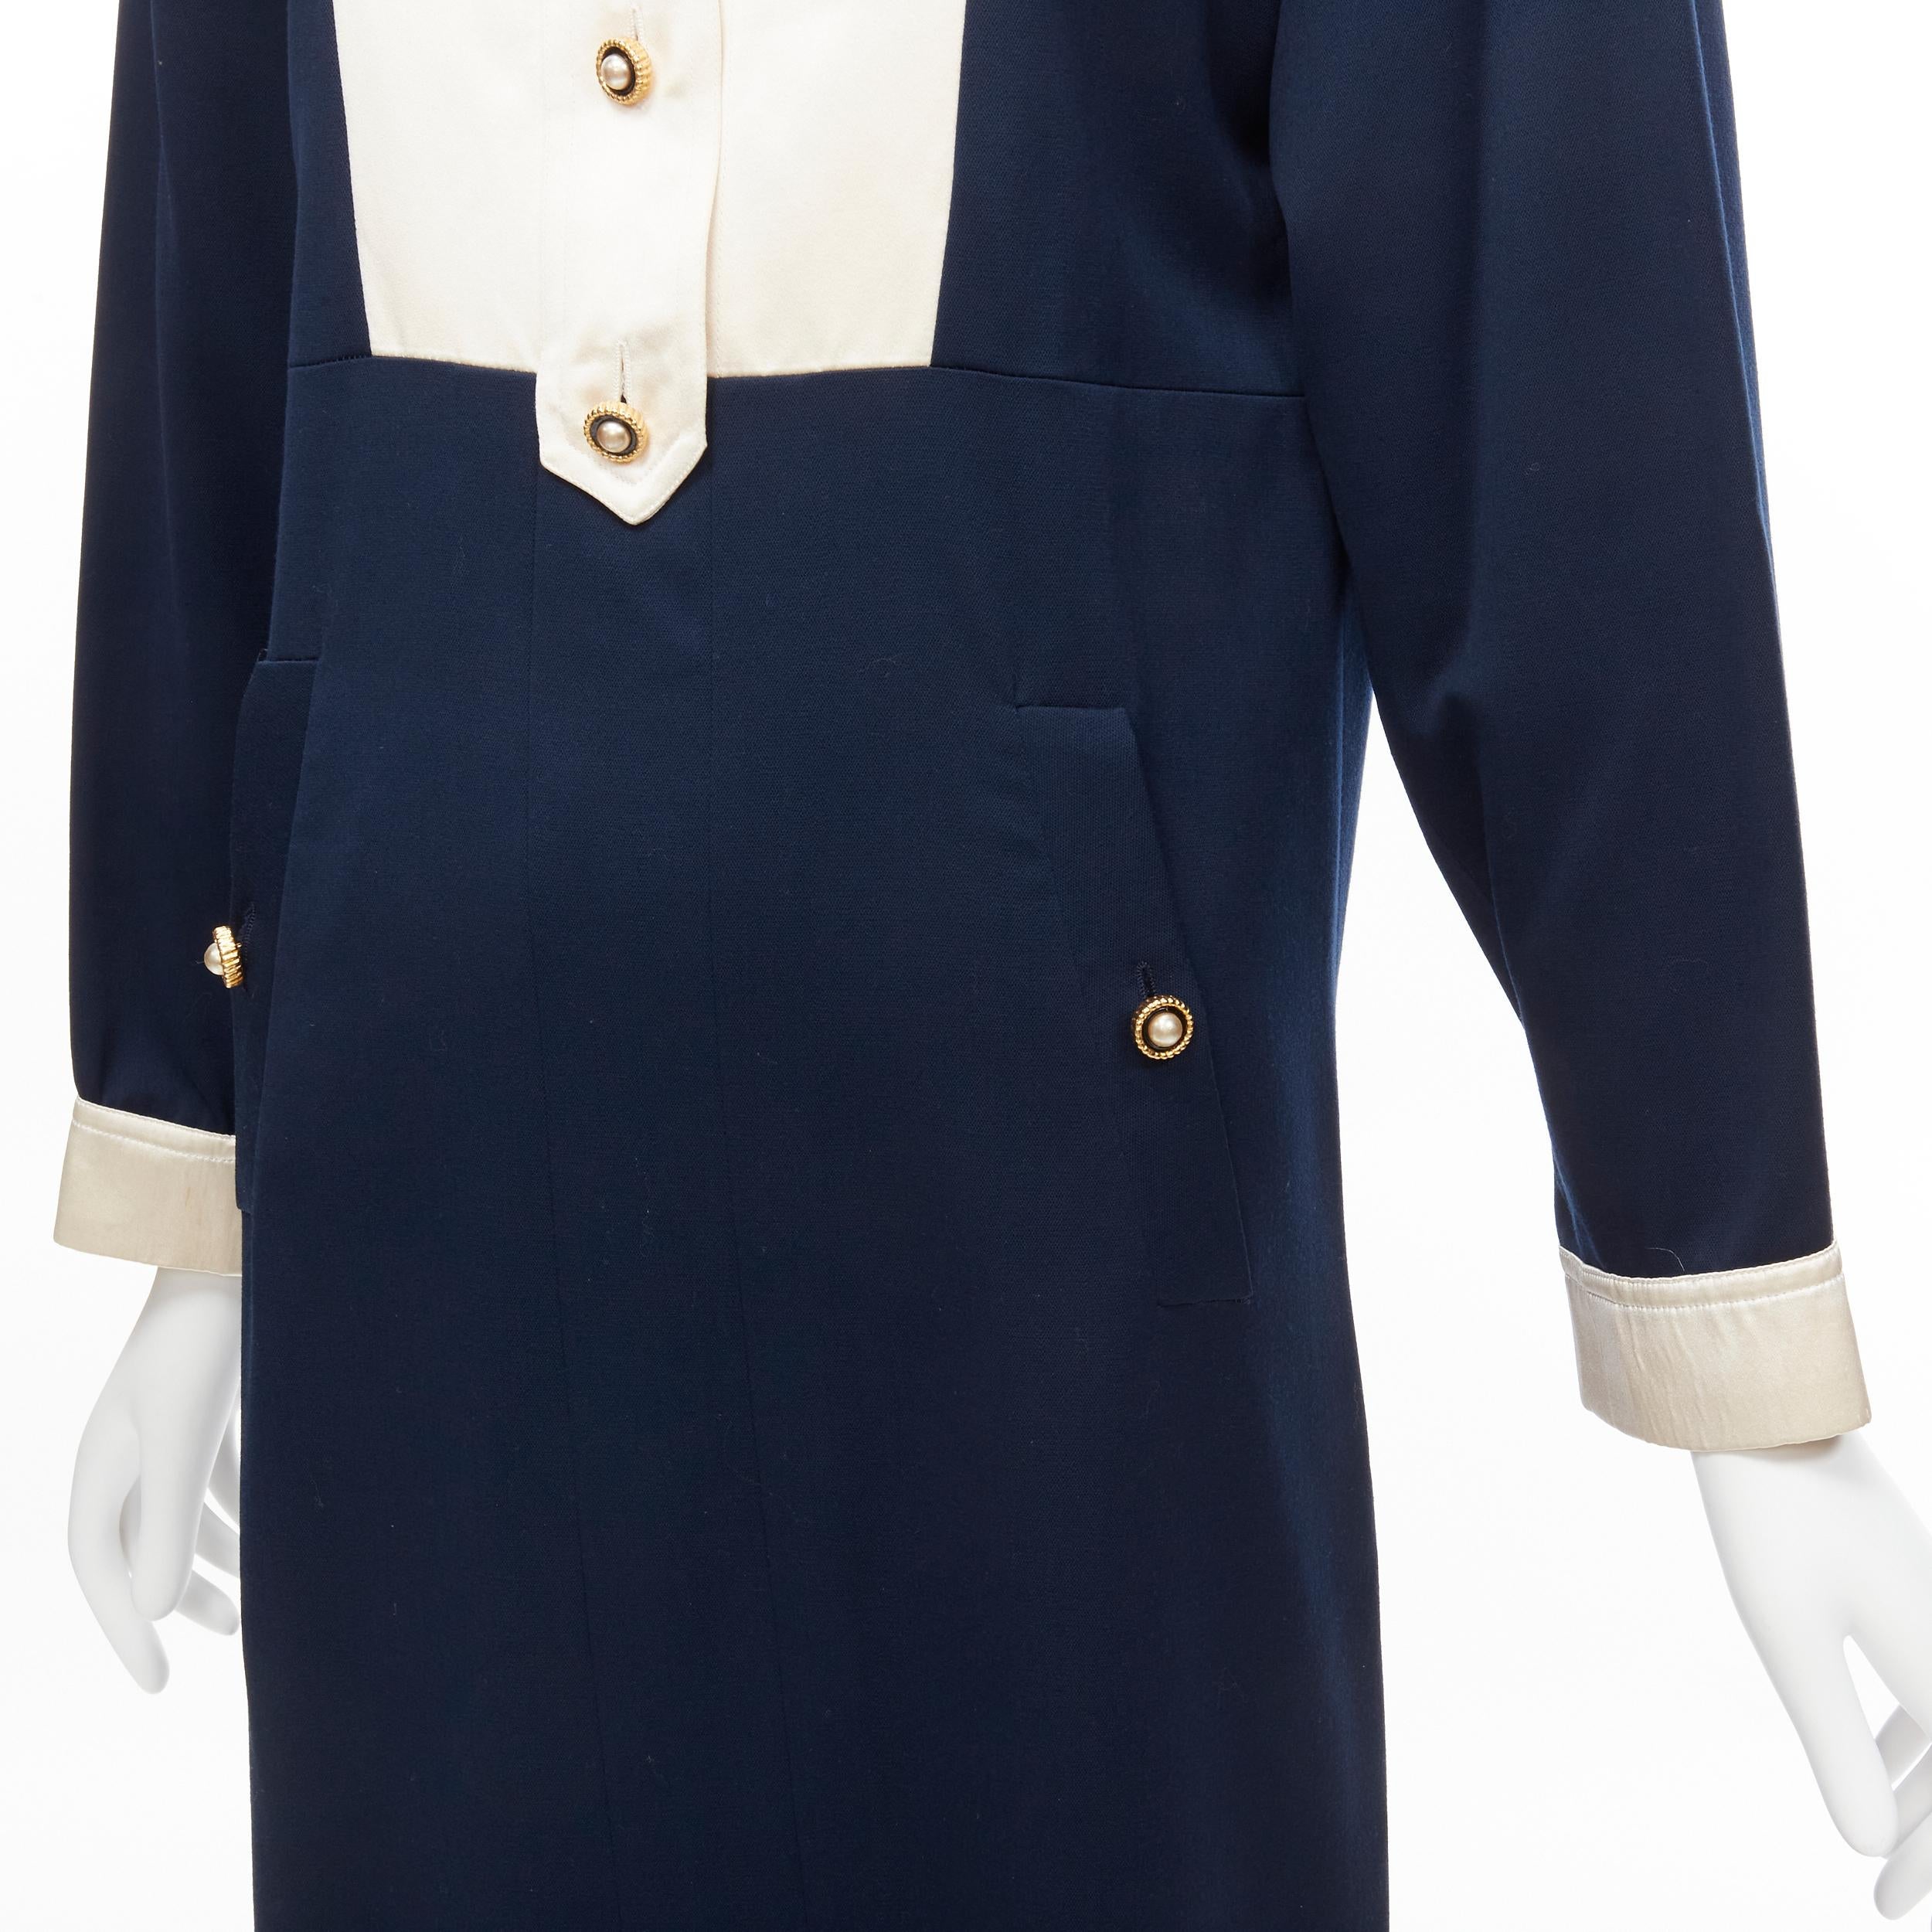 CHANEL Vintage gold pearl button cream navy two tone wool silk dress FR36 S For Sale 3